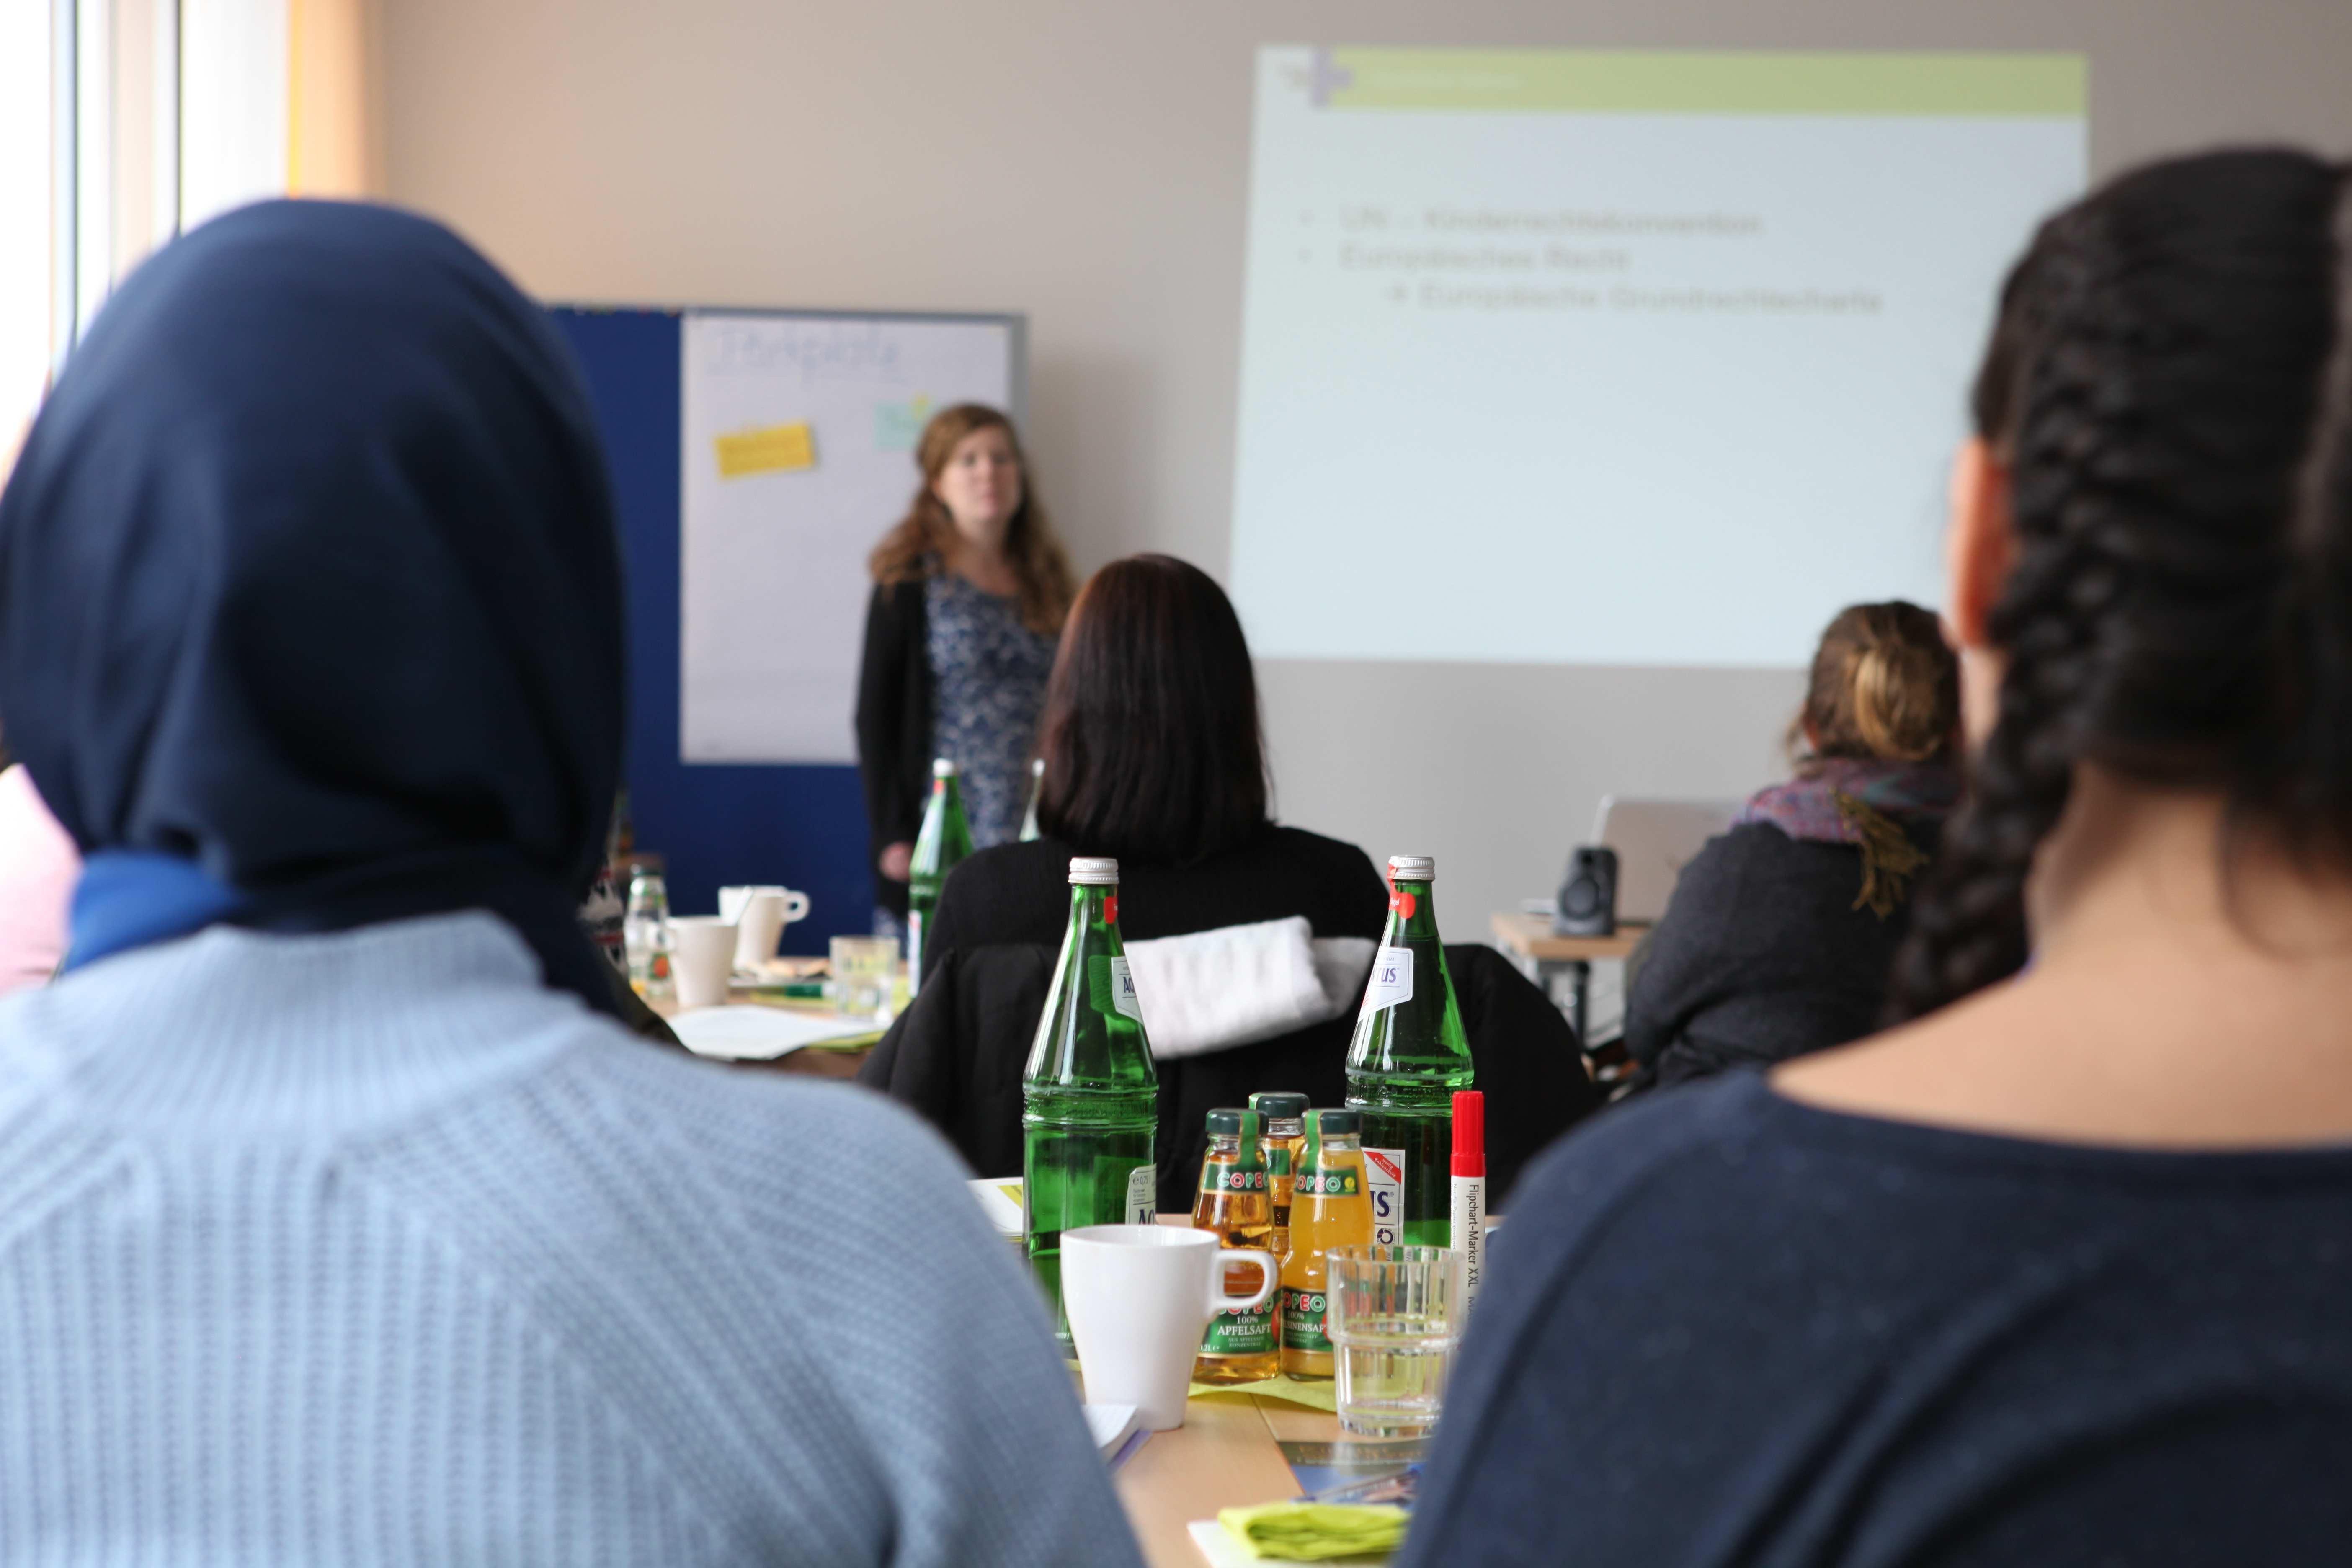 Kindernothilfe Training and Consulting-Schulung (Quelle: Ludwig Grunewald)